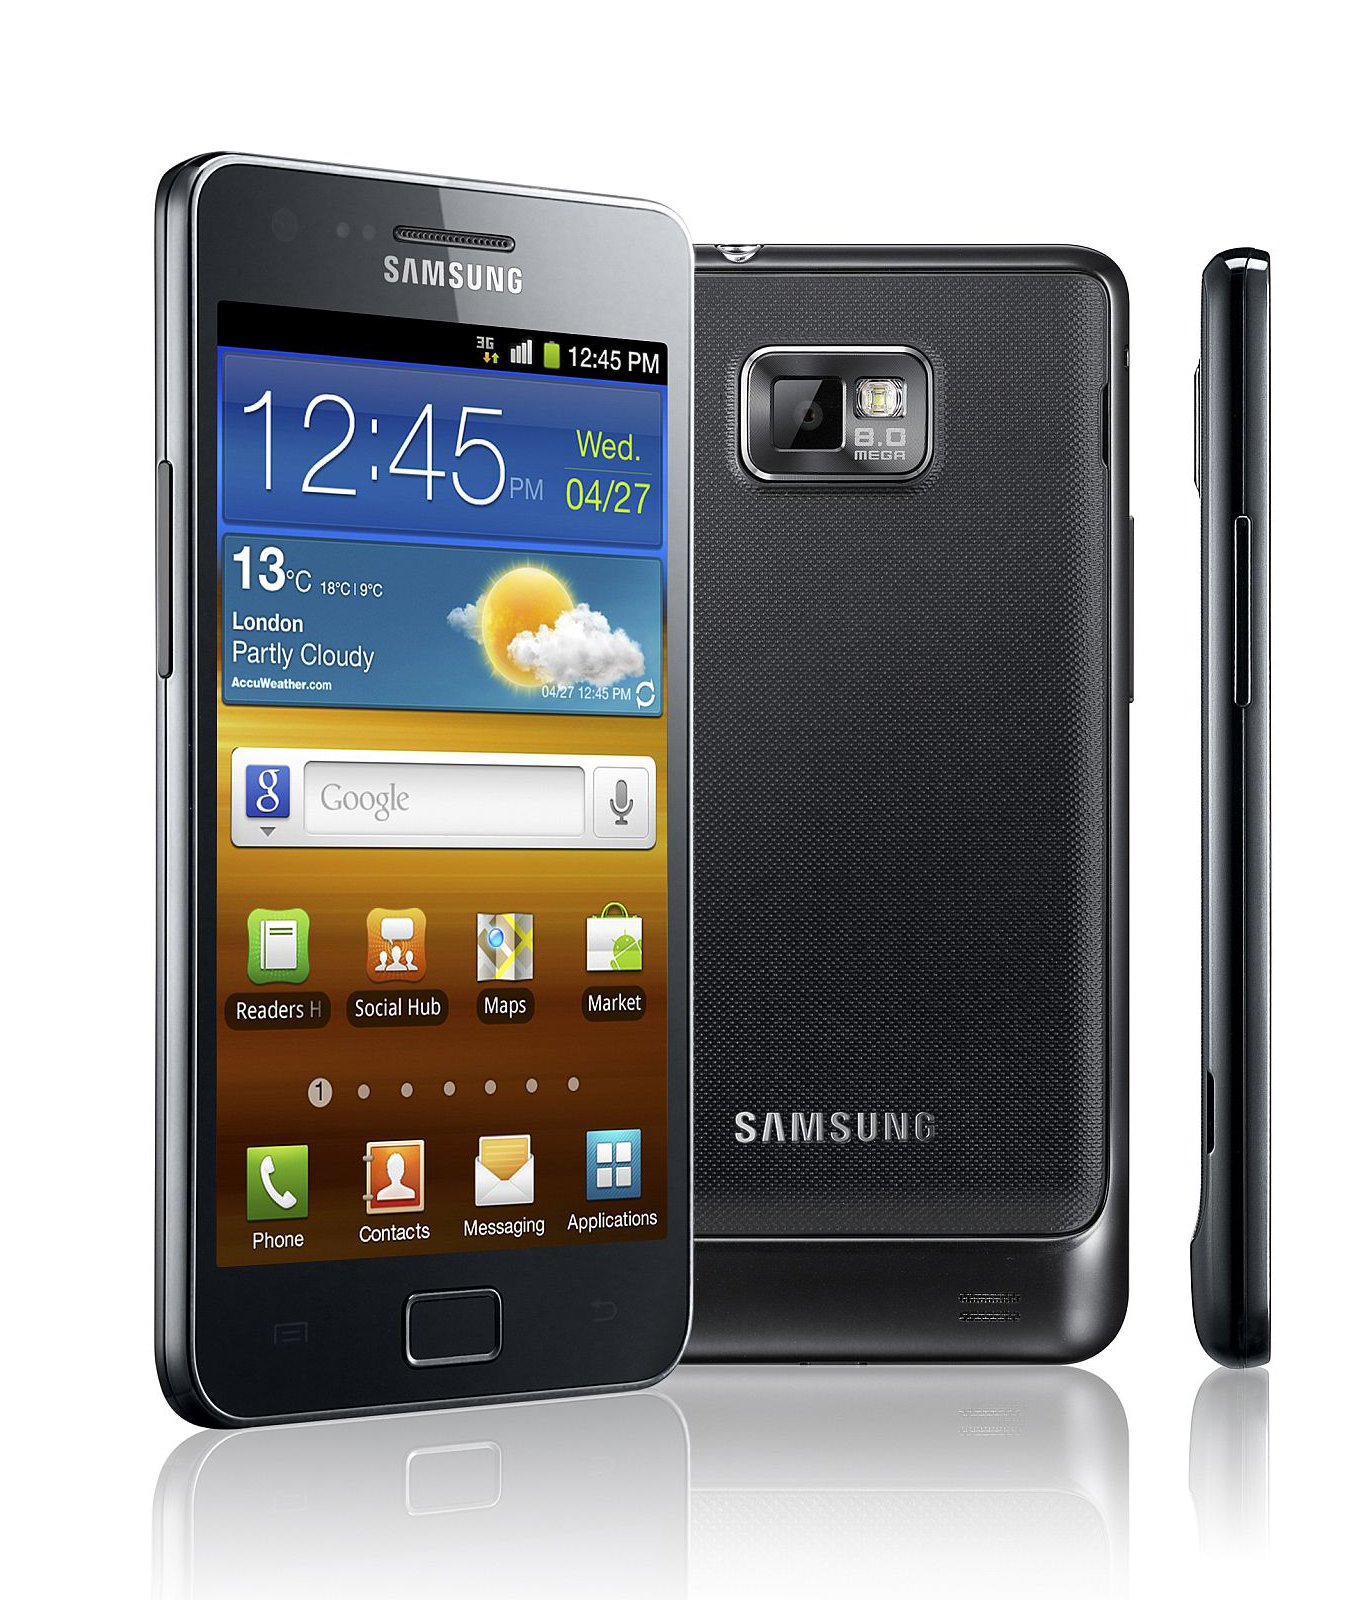 samsung-galaxy-s2-specs-review-release-date-phonesdata